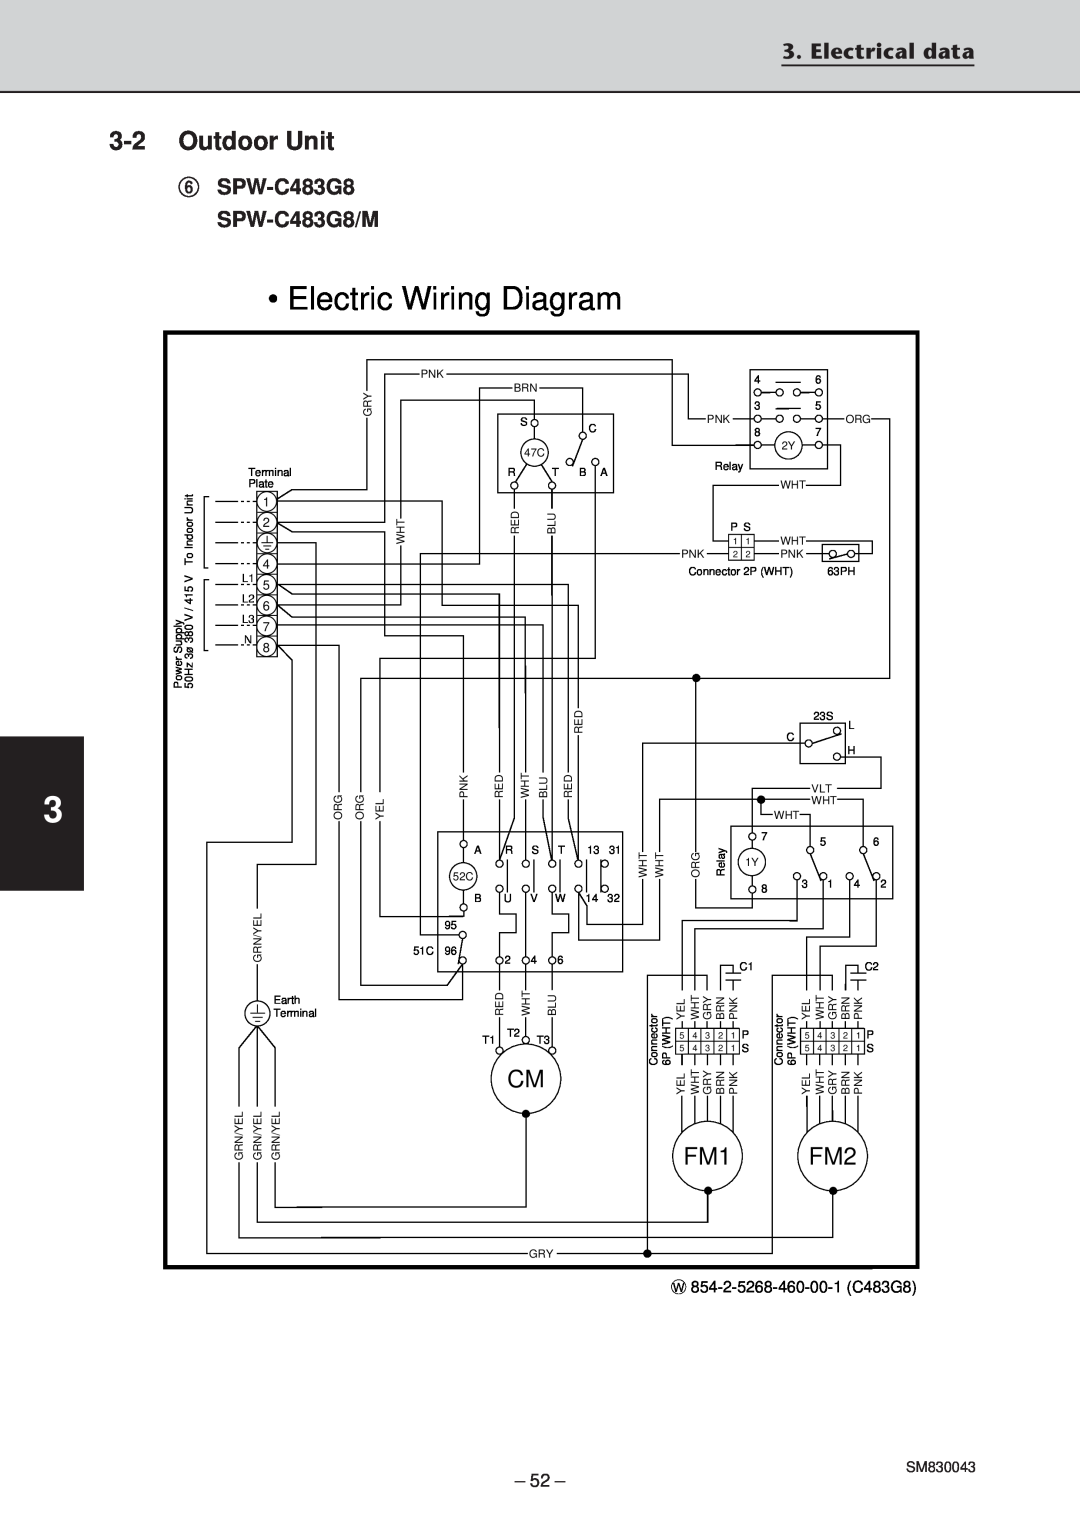 Sanyo SPW-T363G56, SPW-T363GS56 Electric Wiring Diagram, 3-2Outdoor Unit, Electrical data, 6SPW-C483G8 SPW-C483G8/M 